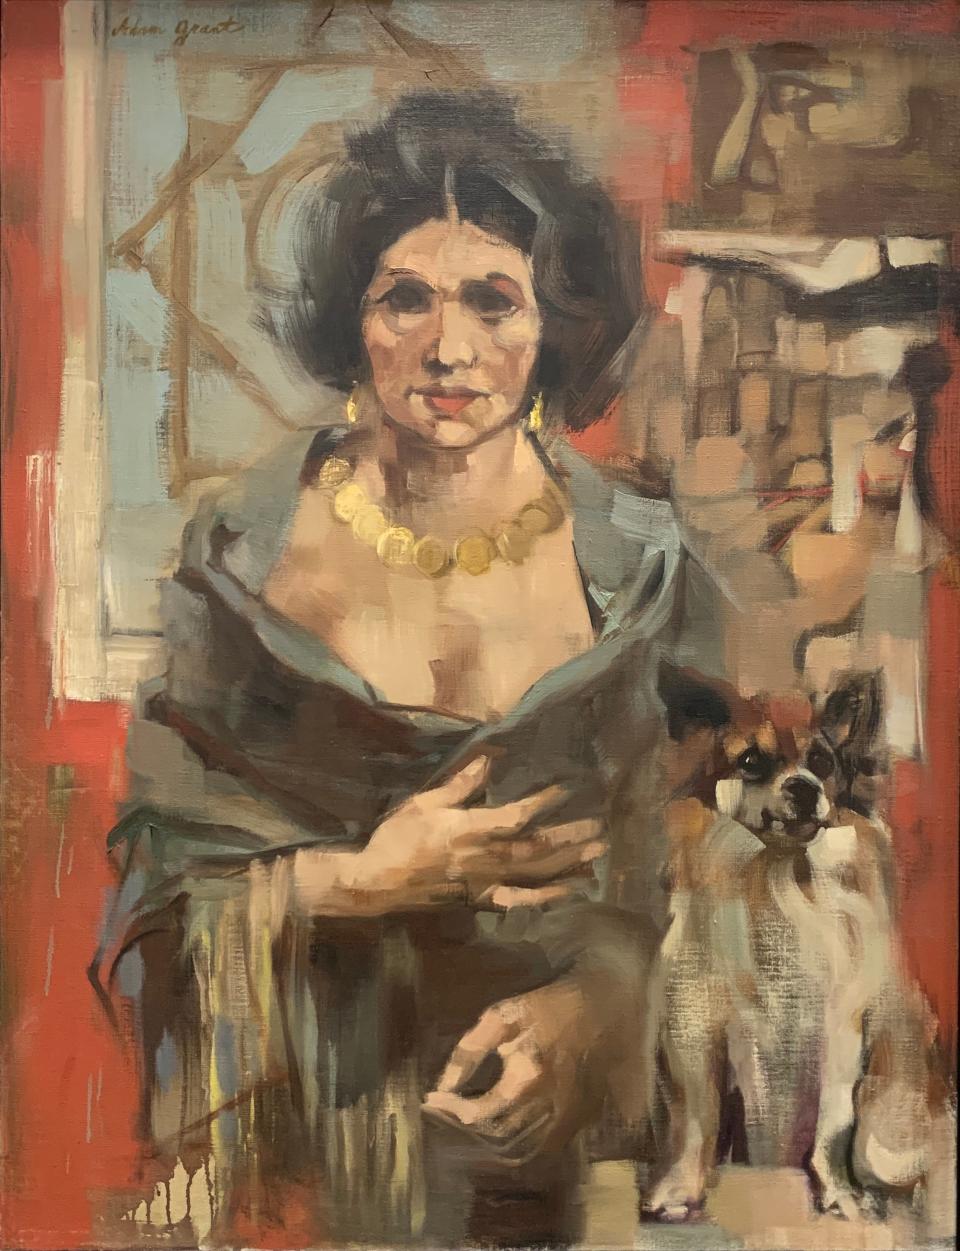 Adam Grant’s 1968 painting “The Fortune Teller” depicts his clairvoyant mother, one of many works from The Ringling museum’s collection featured in the new “Embodied” exhibition.